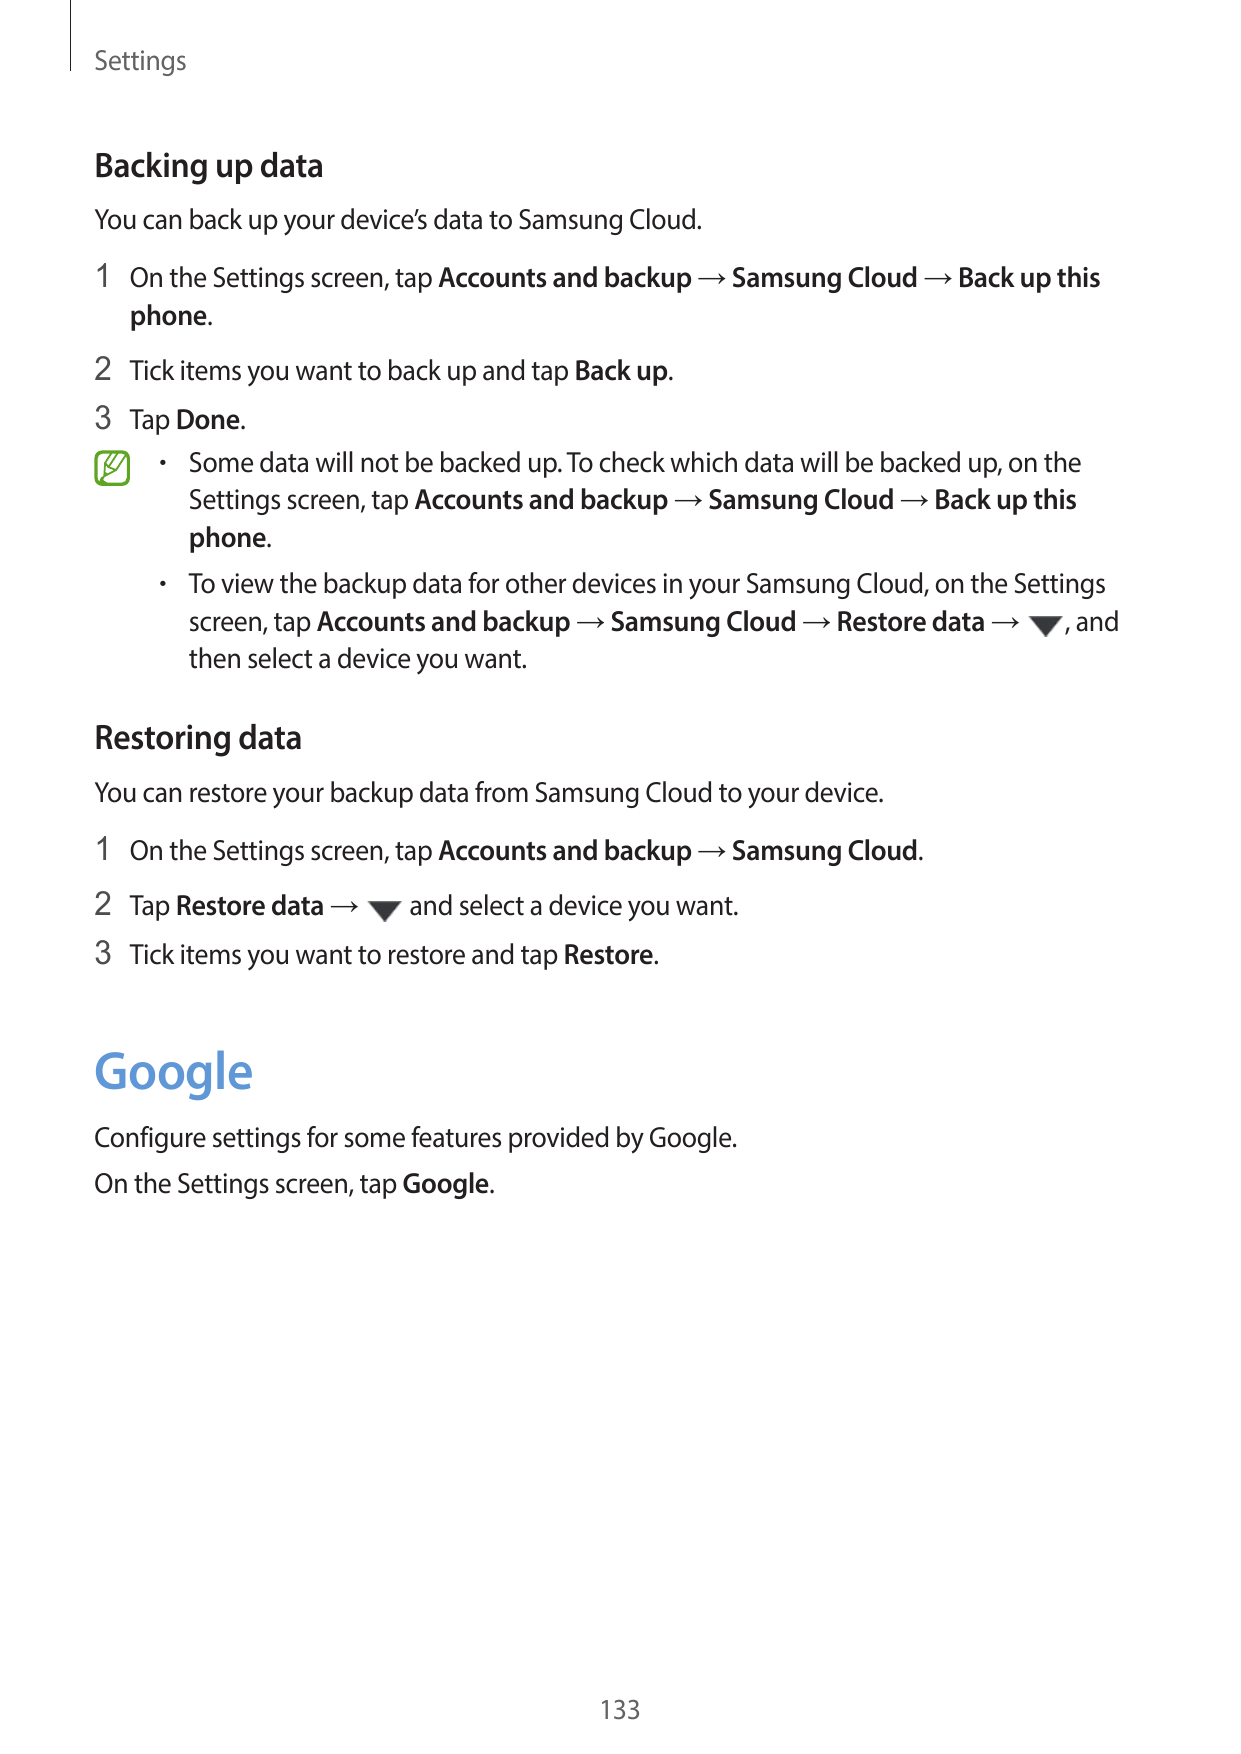 SettingsBacking up dataYou can back up your device’s data to Samsung Cloud.1 On the Settings screen, tap Accounts and backup → S